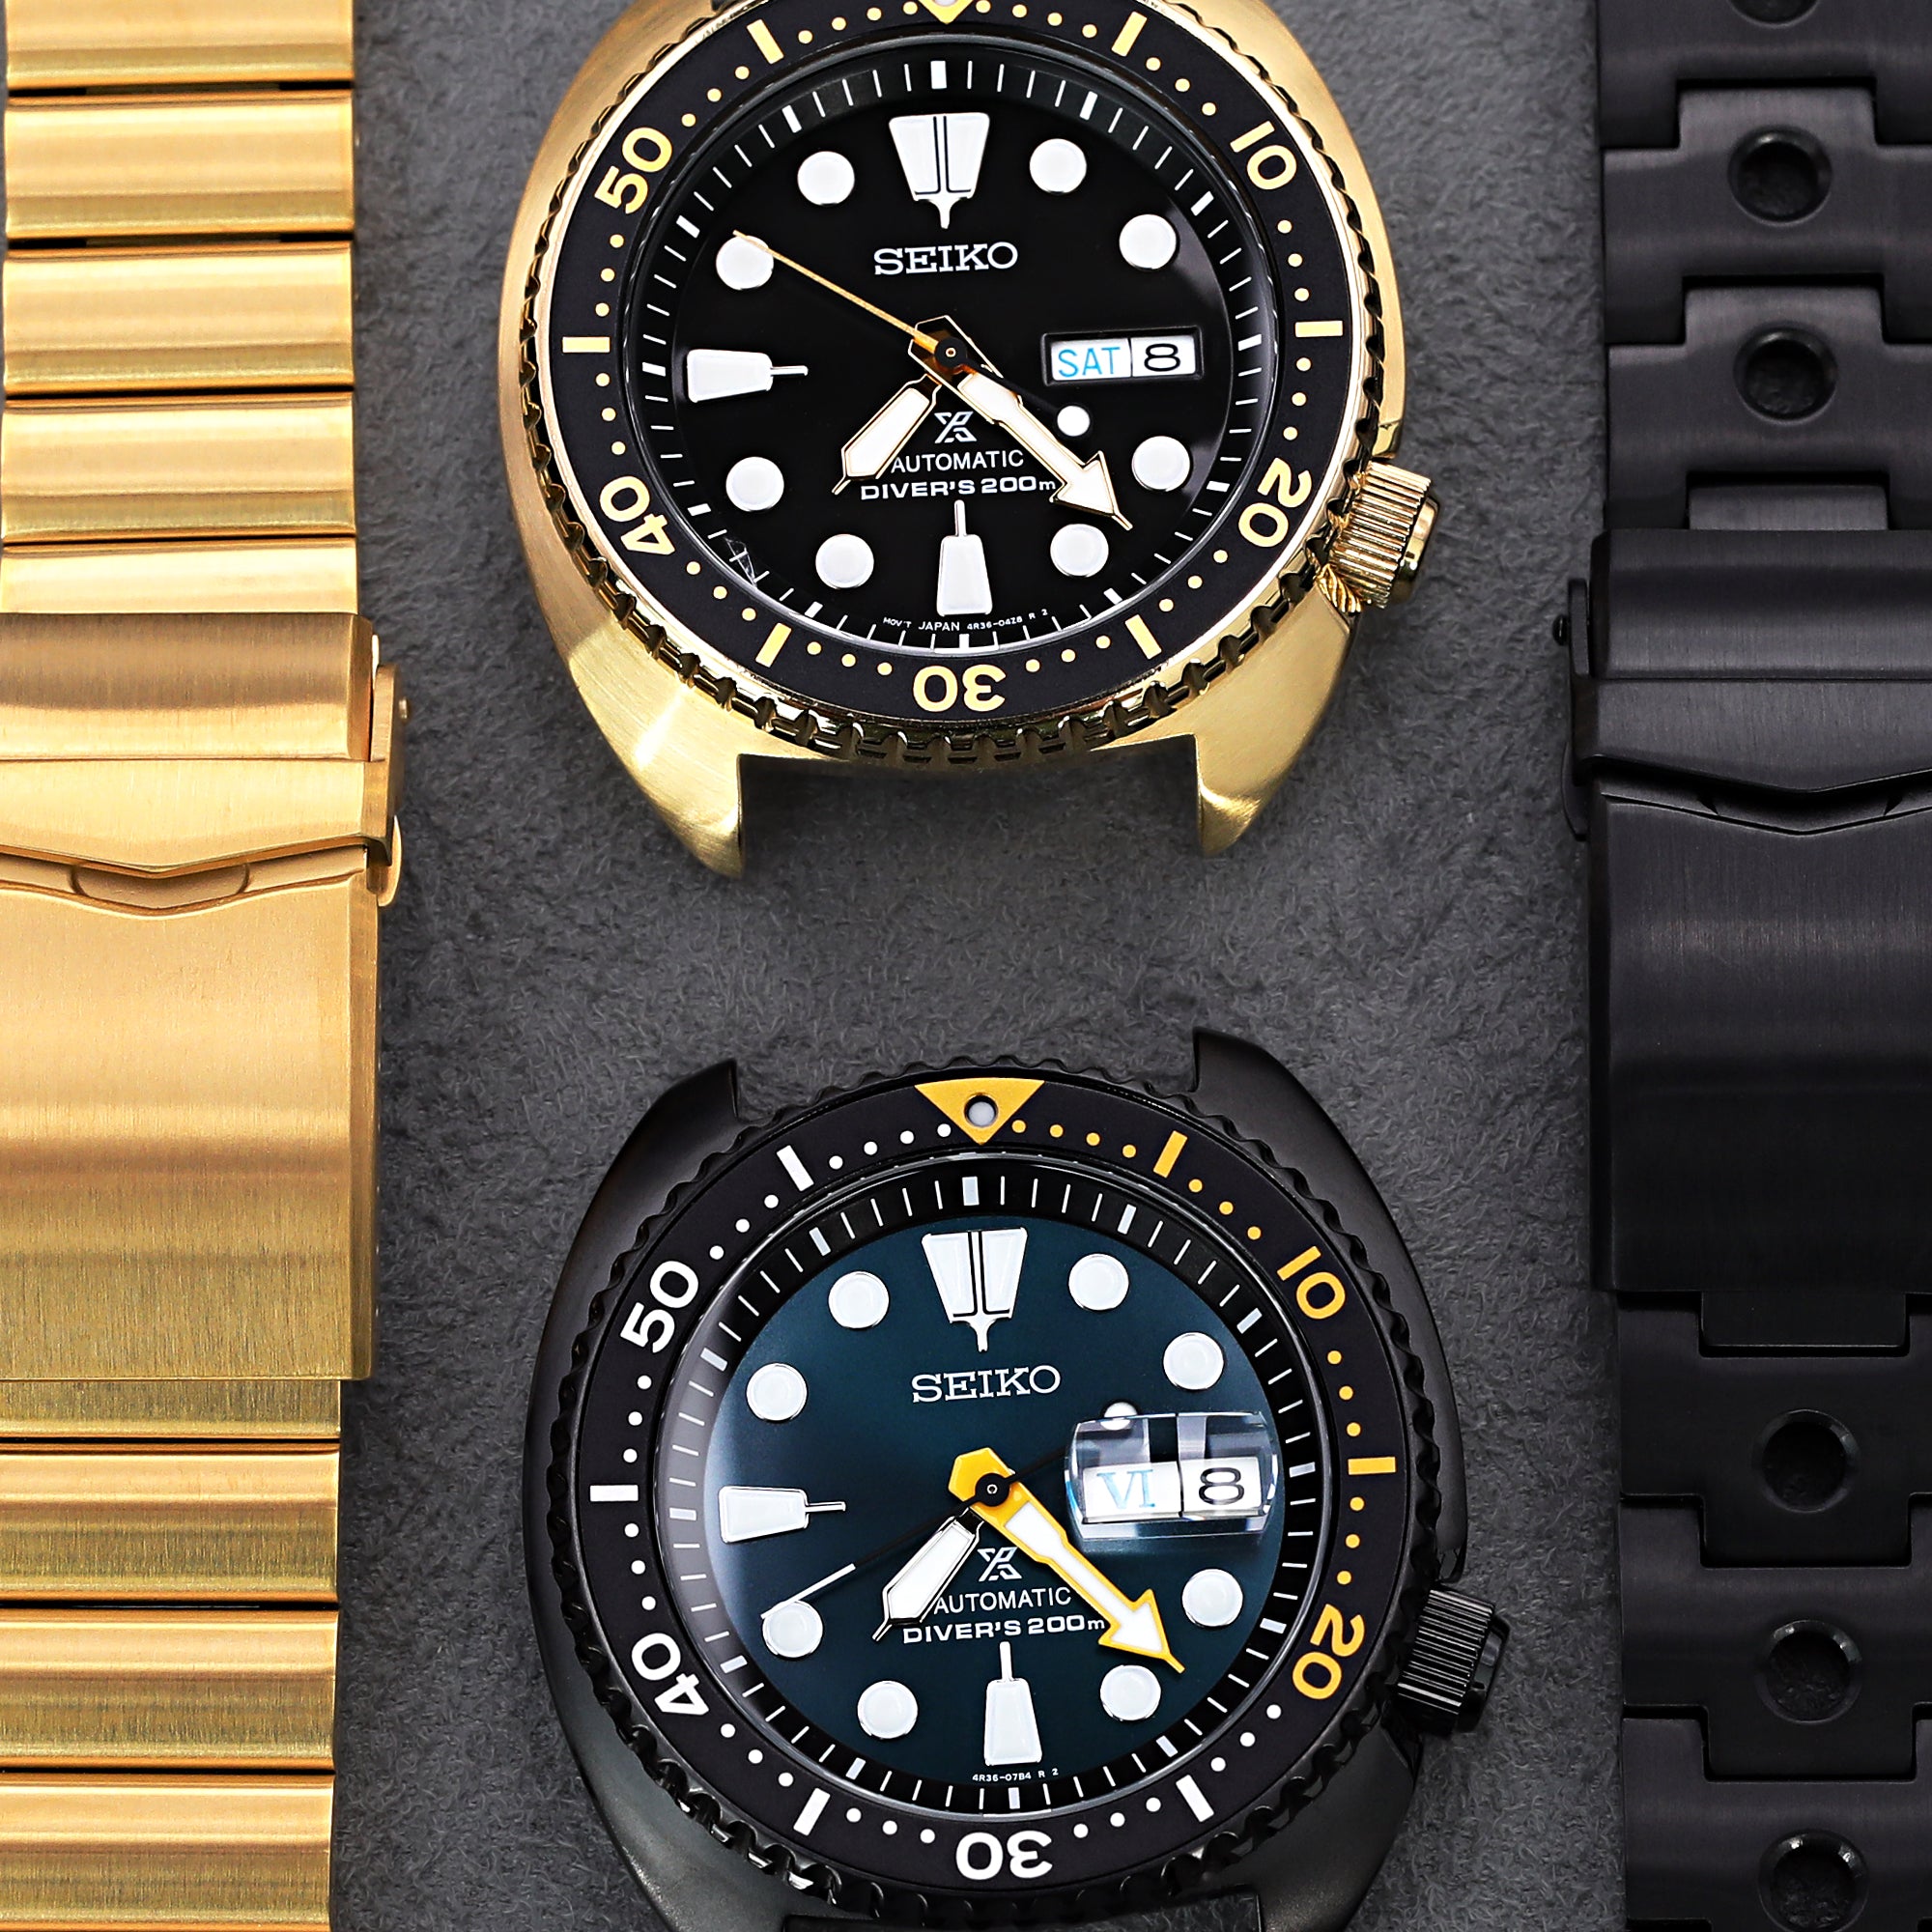 What Do You Know About Your Watch Divers Clasp?